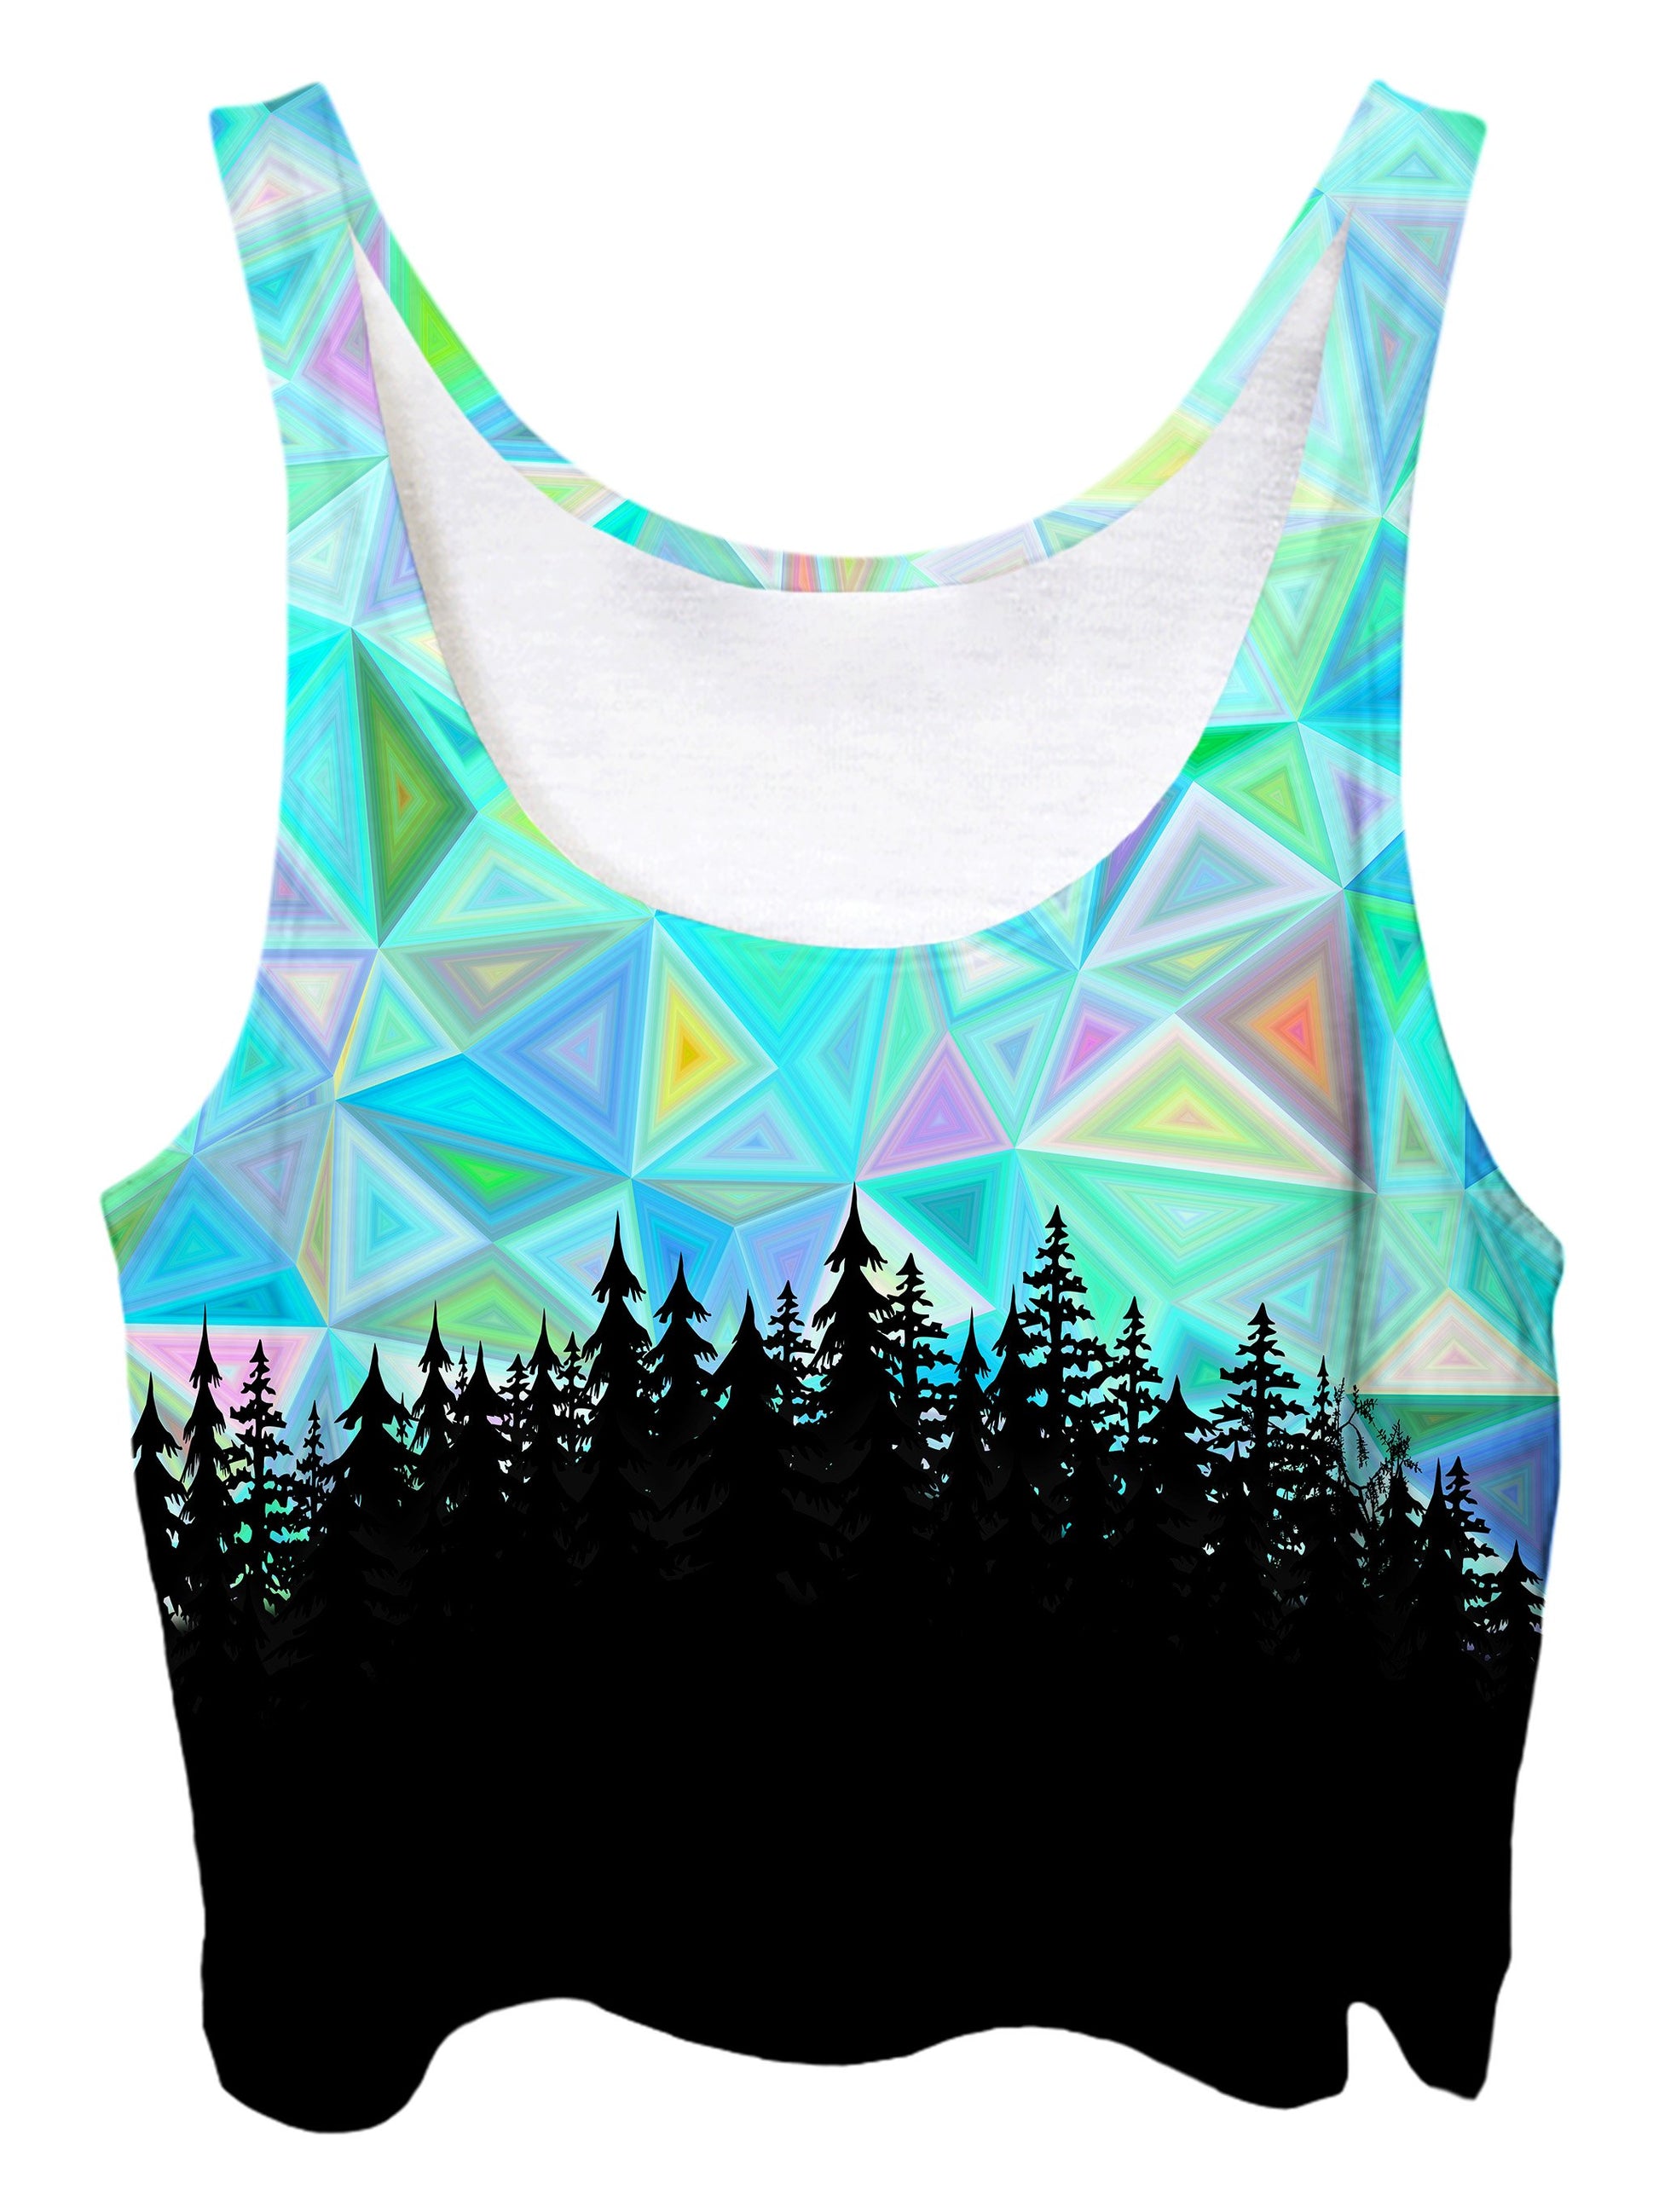 Trippy front view of GratefullyDyed Apparel blue geometry forest crop top.